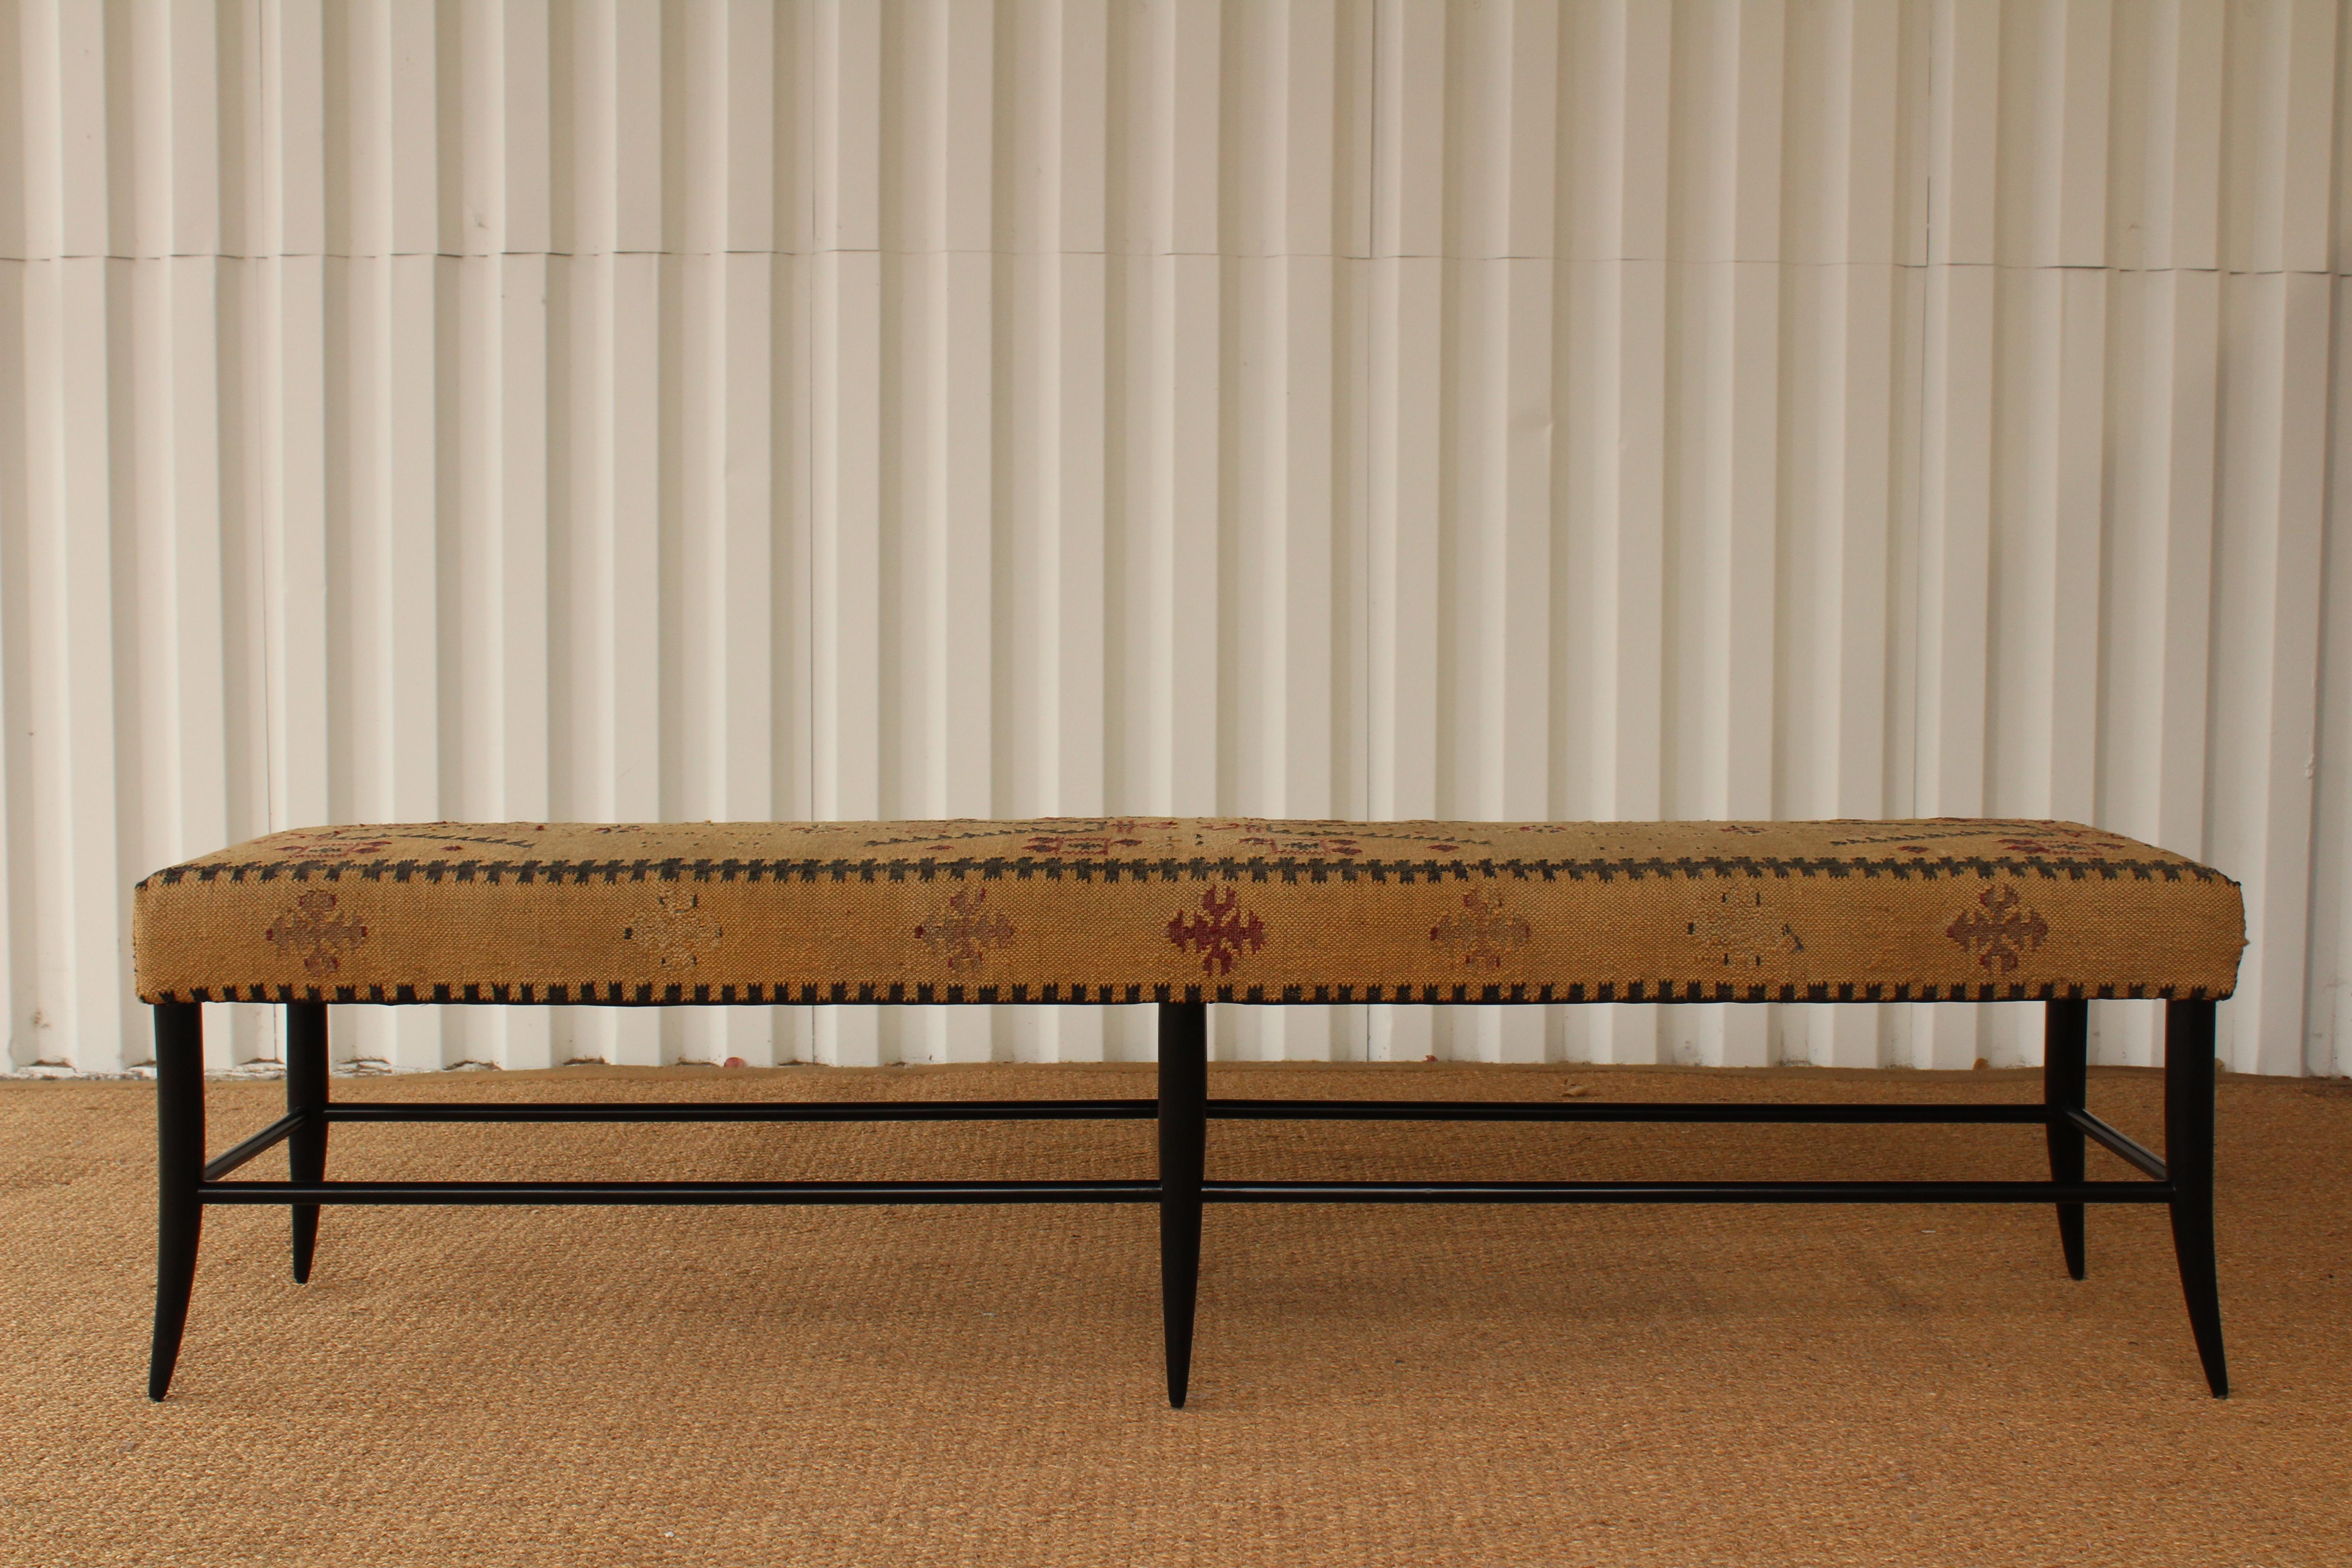 Custom Croft bench with an ebonized wood base and upholstered in a vintage flat-weave Kilim rug.